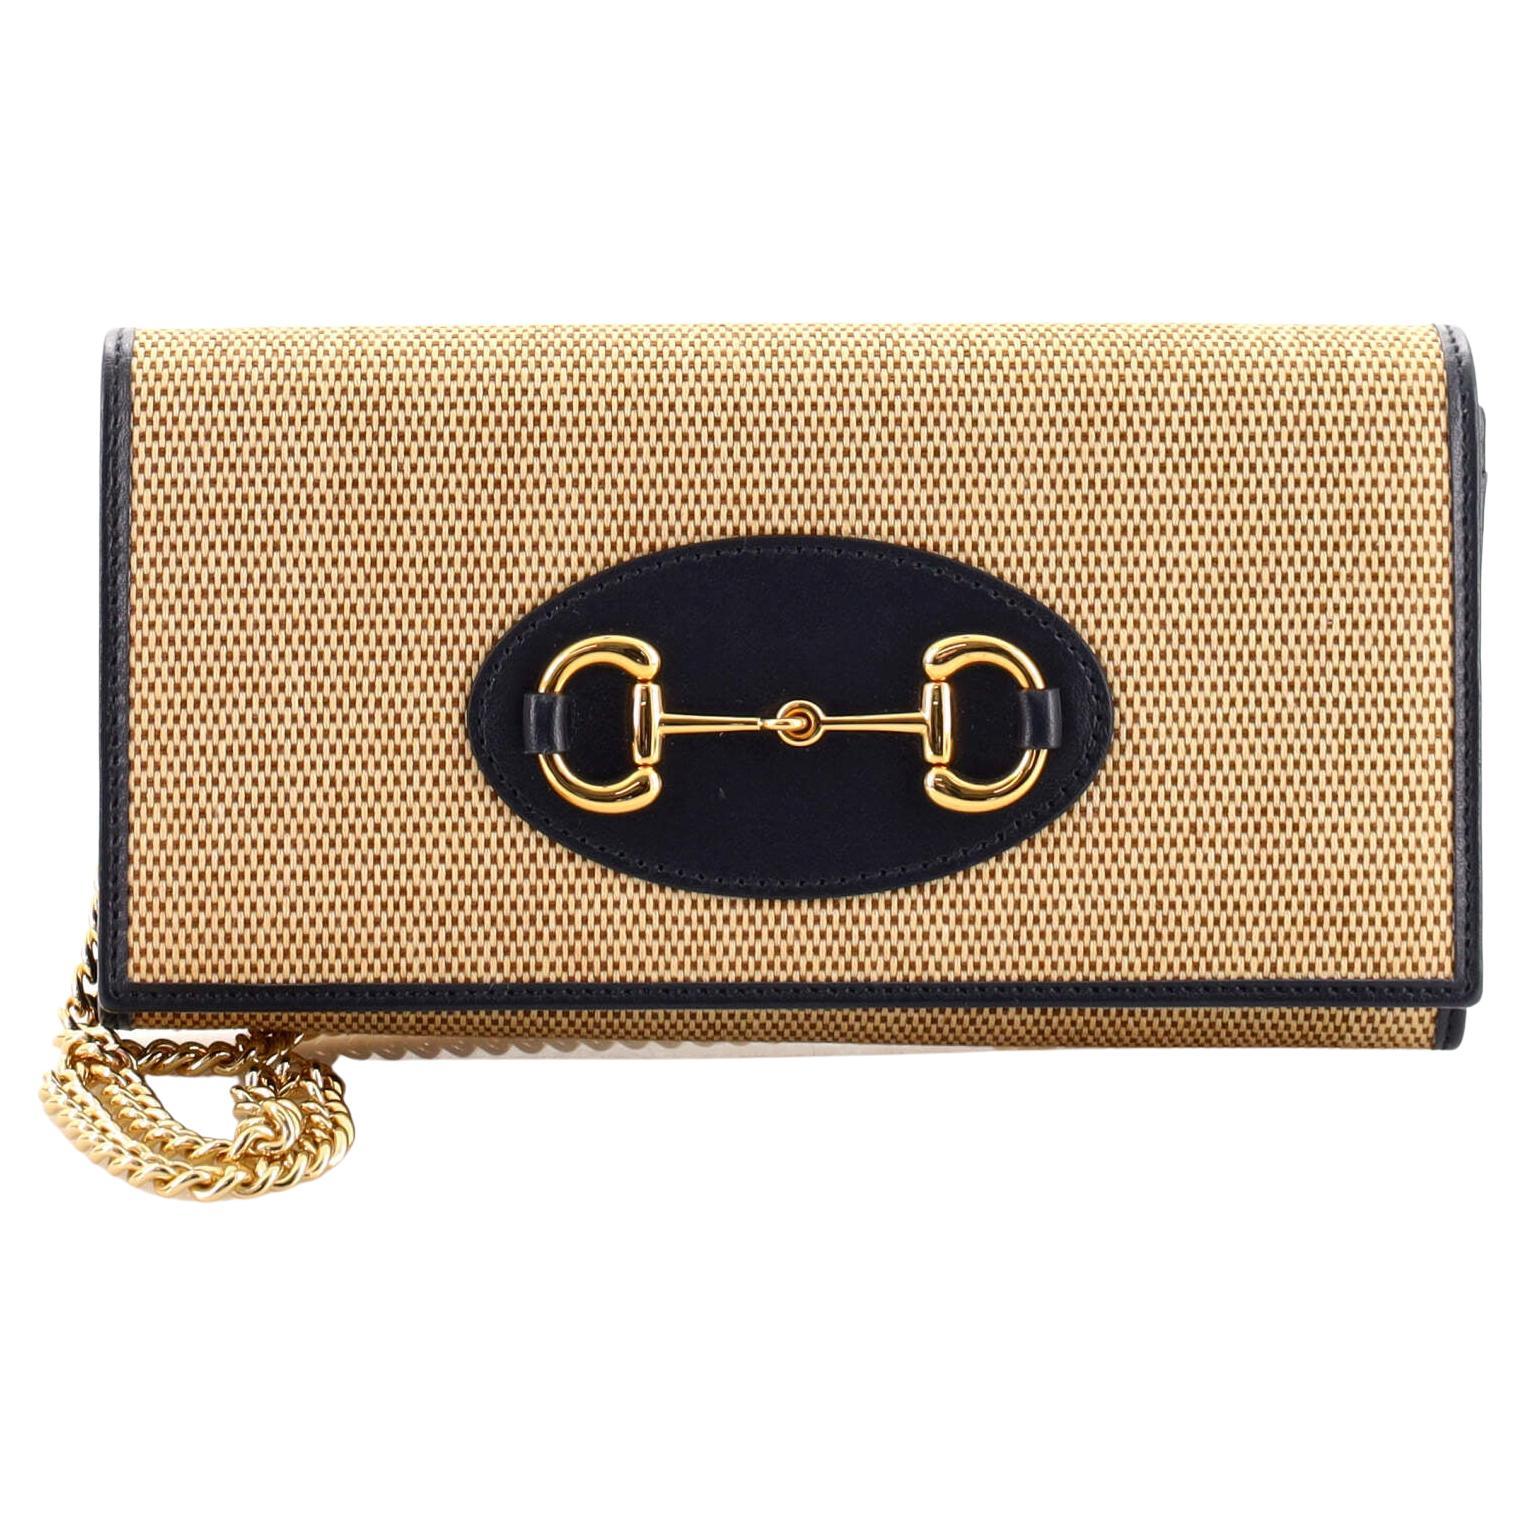 Gucci Horsebit 1955 Chain Wallet Canvas and Leather